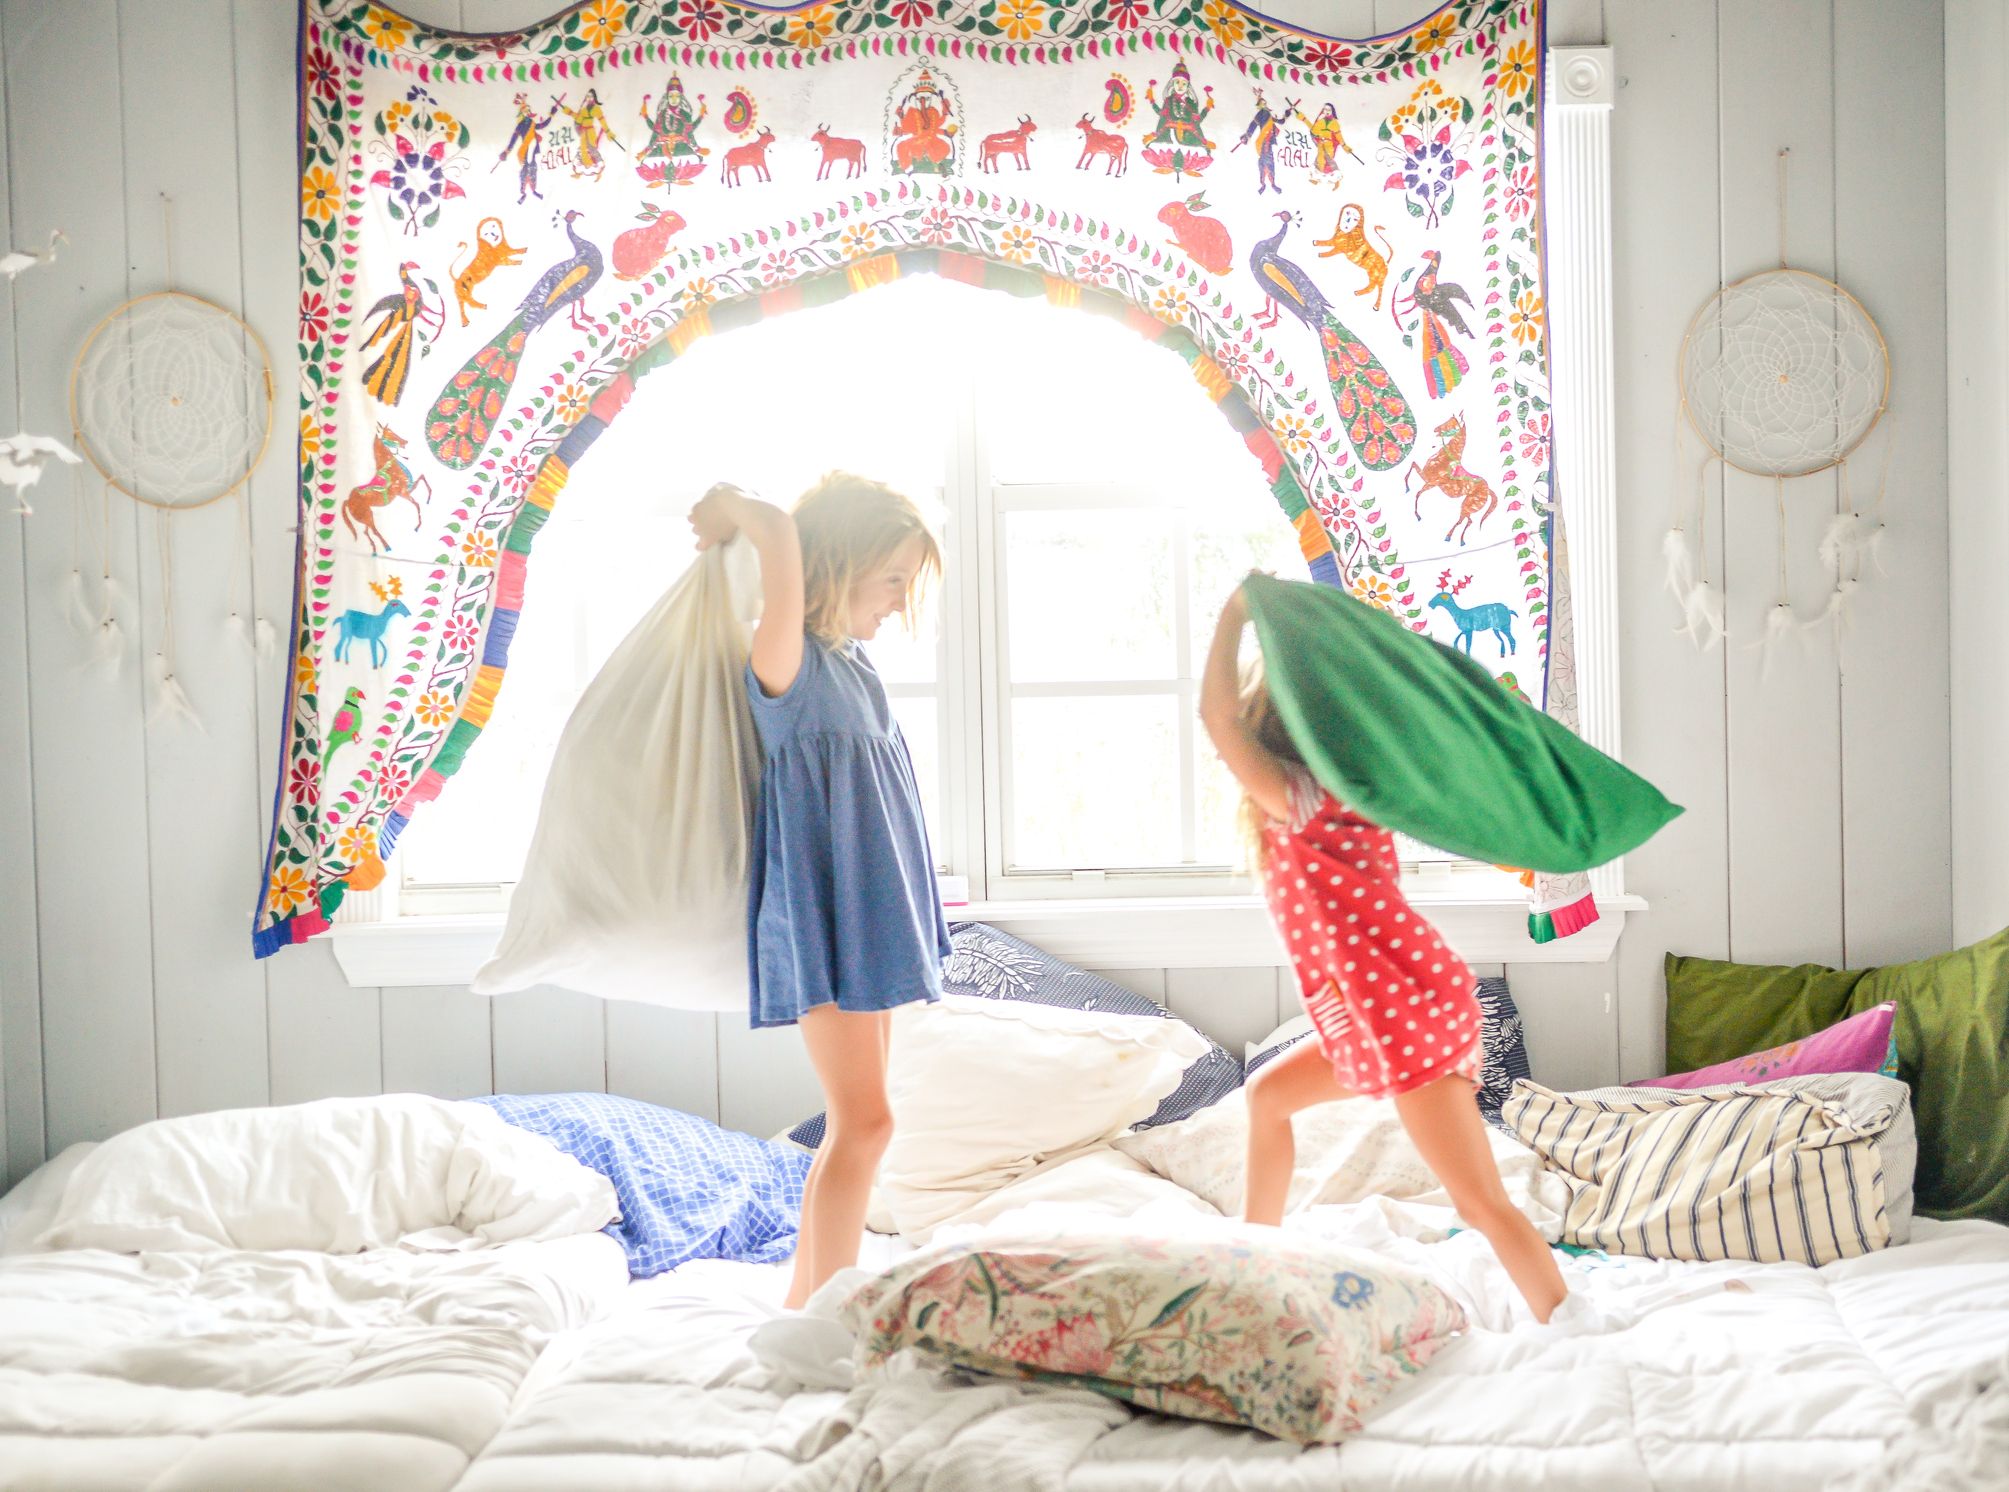 Siblings have a pillow fight in their bedroom